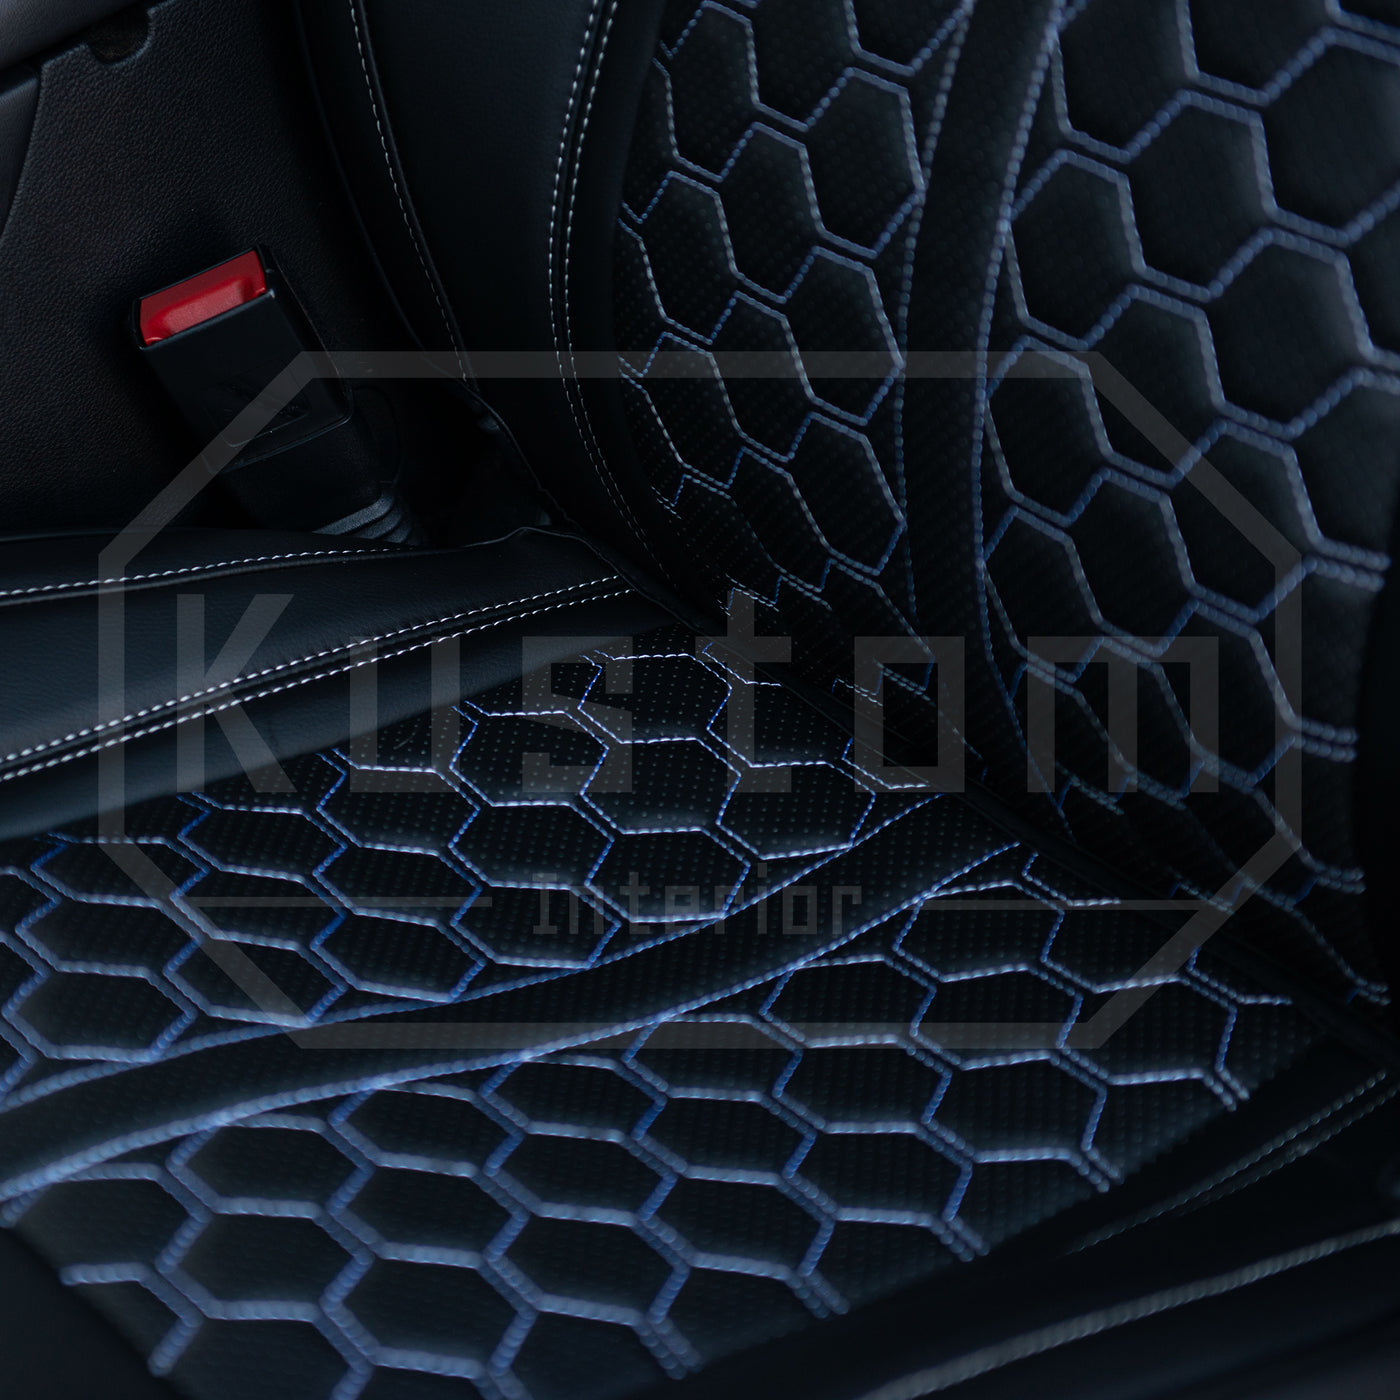 2015-Up Dodge Charger Custom Leather Seat Cover (Sport Seat)